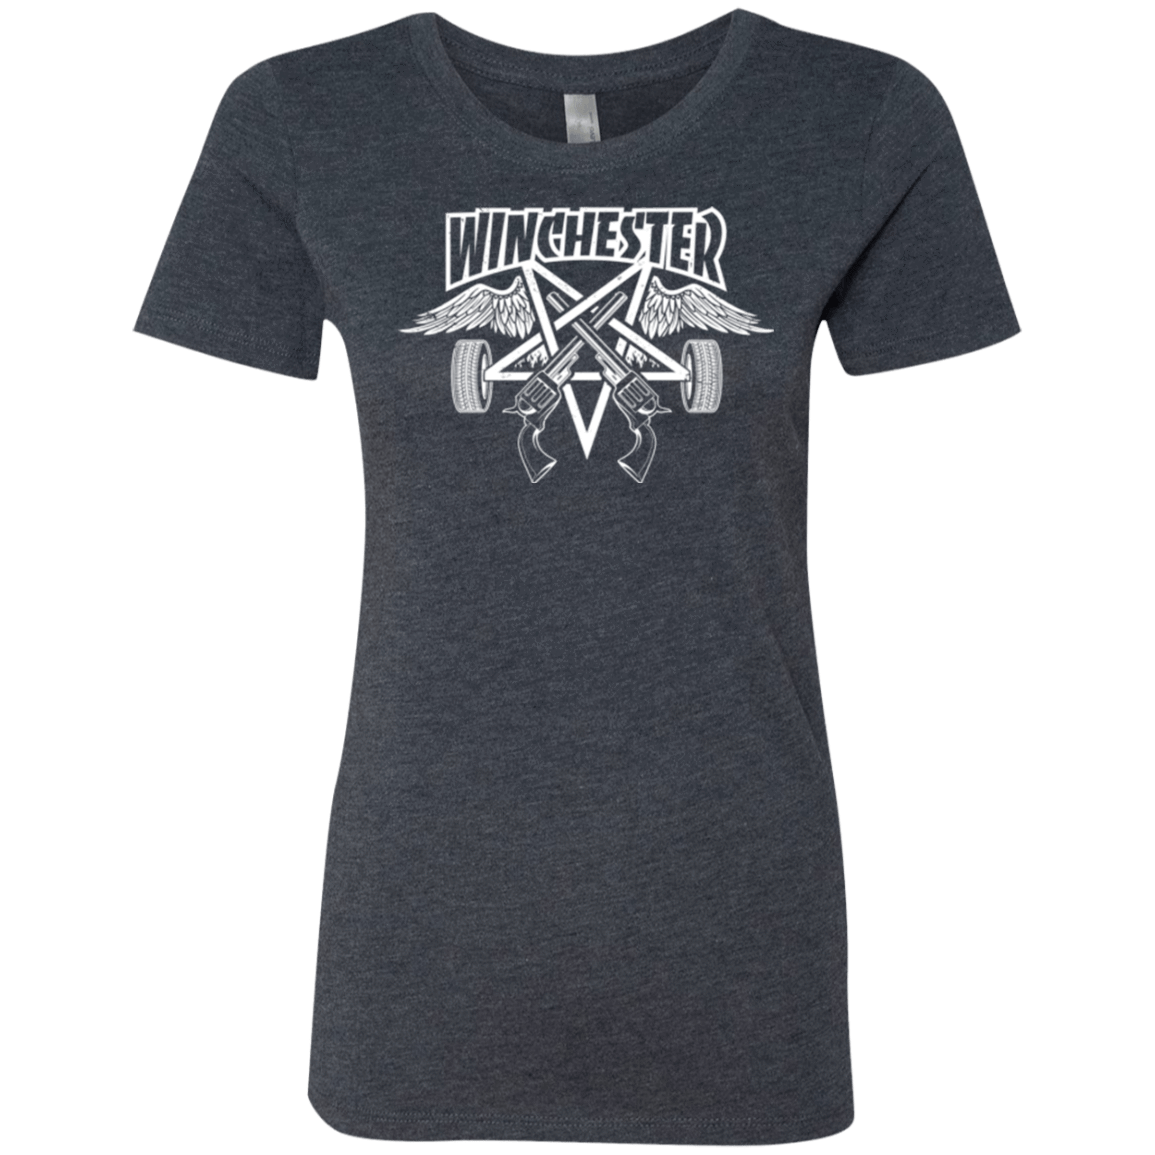 T-Shirts Vintage Navy / Small WINCHESTER Women's Triblend T-Shirt